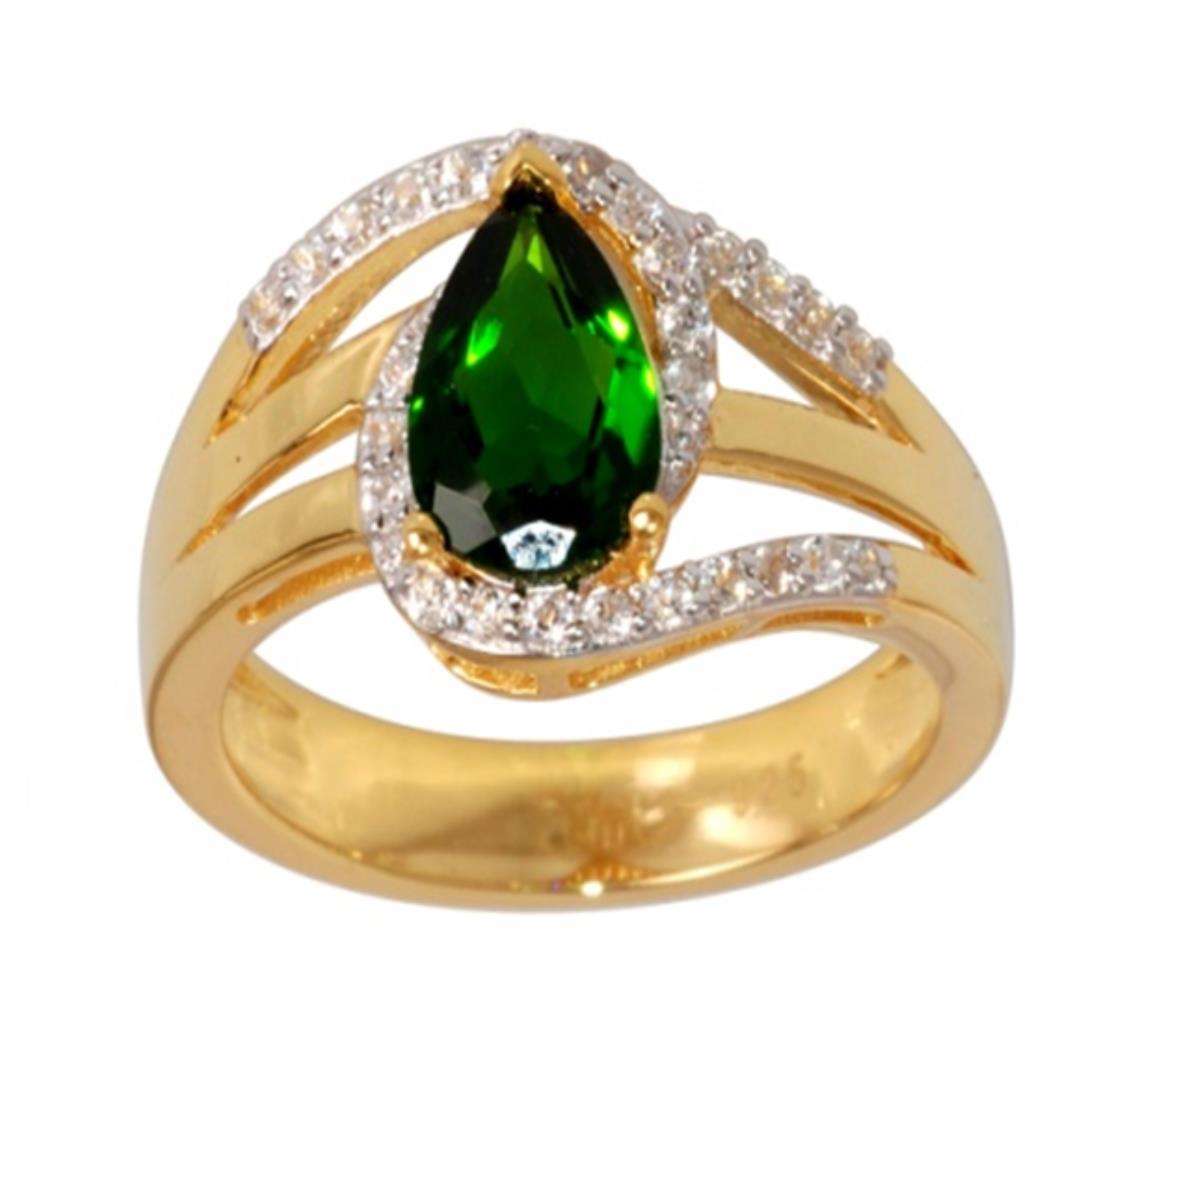 Sterling Silver Yellow 1-Micron 3-Strand 9x6mm Pear Cut Chrome Diopside & White Zircon Fashion Ring